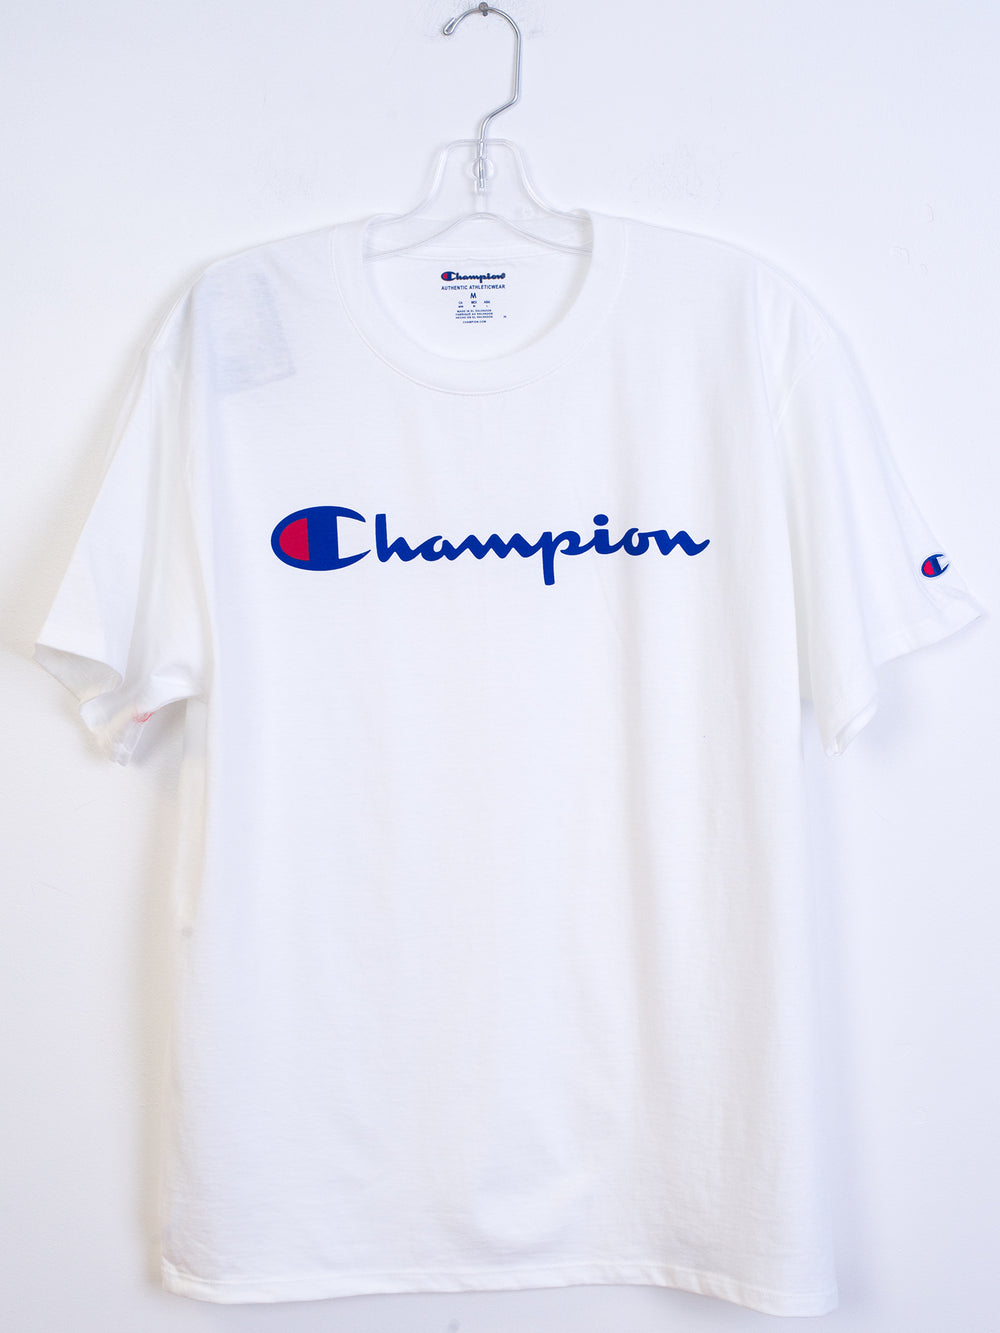 CHAMPION GRAPHIC T-SHIRT - CLEARANCE